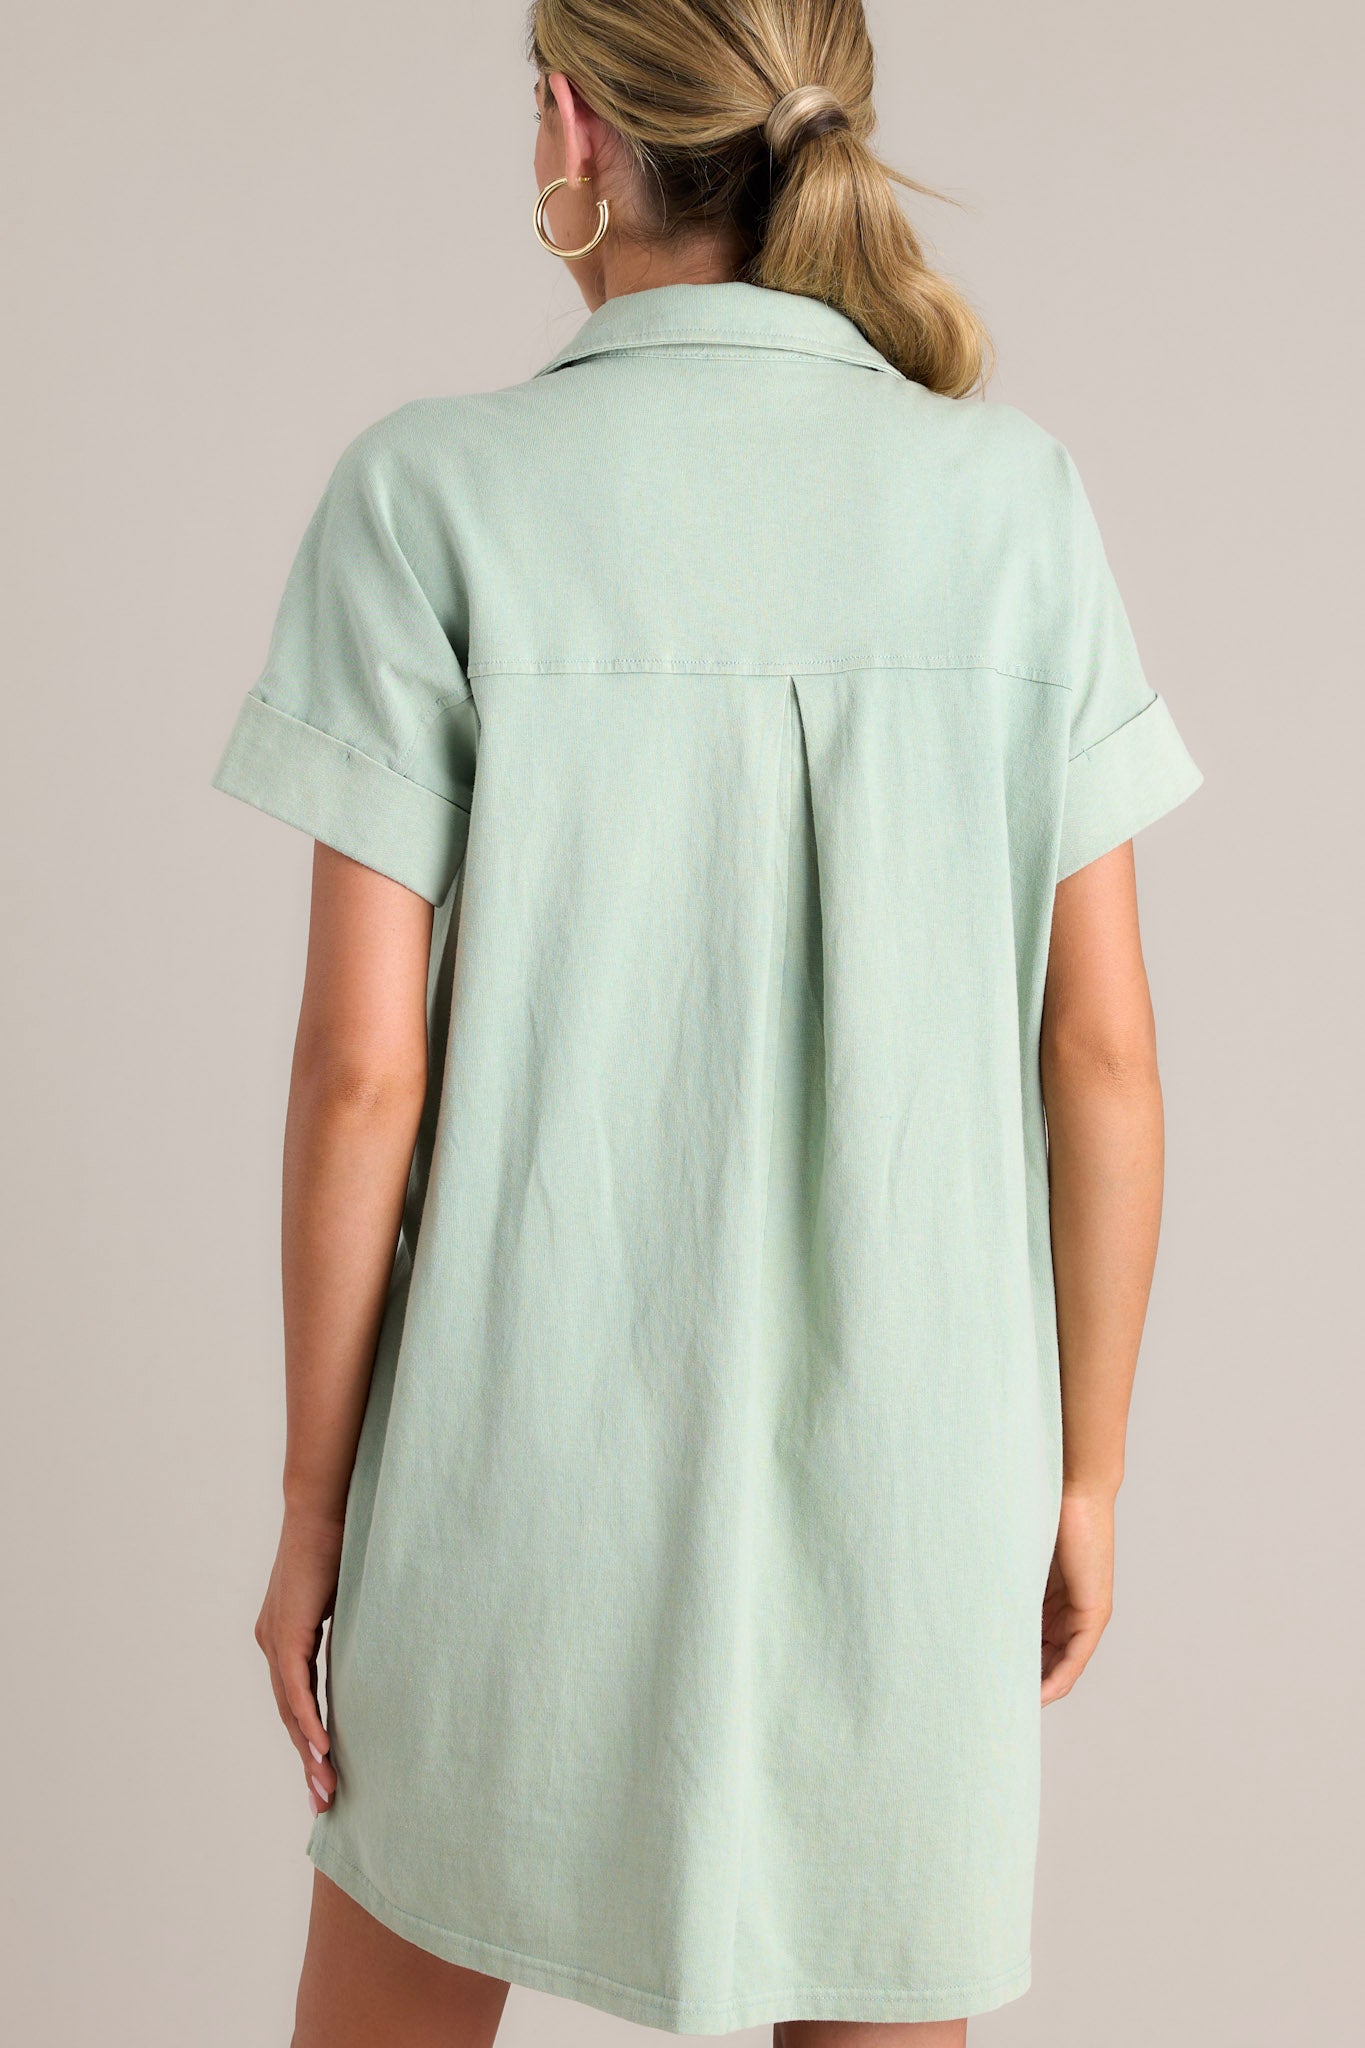 Back view of a sage green mini dress showcasing the collared neckline, relaxed fit, and cuffed short sleeves.